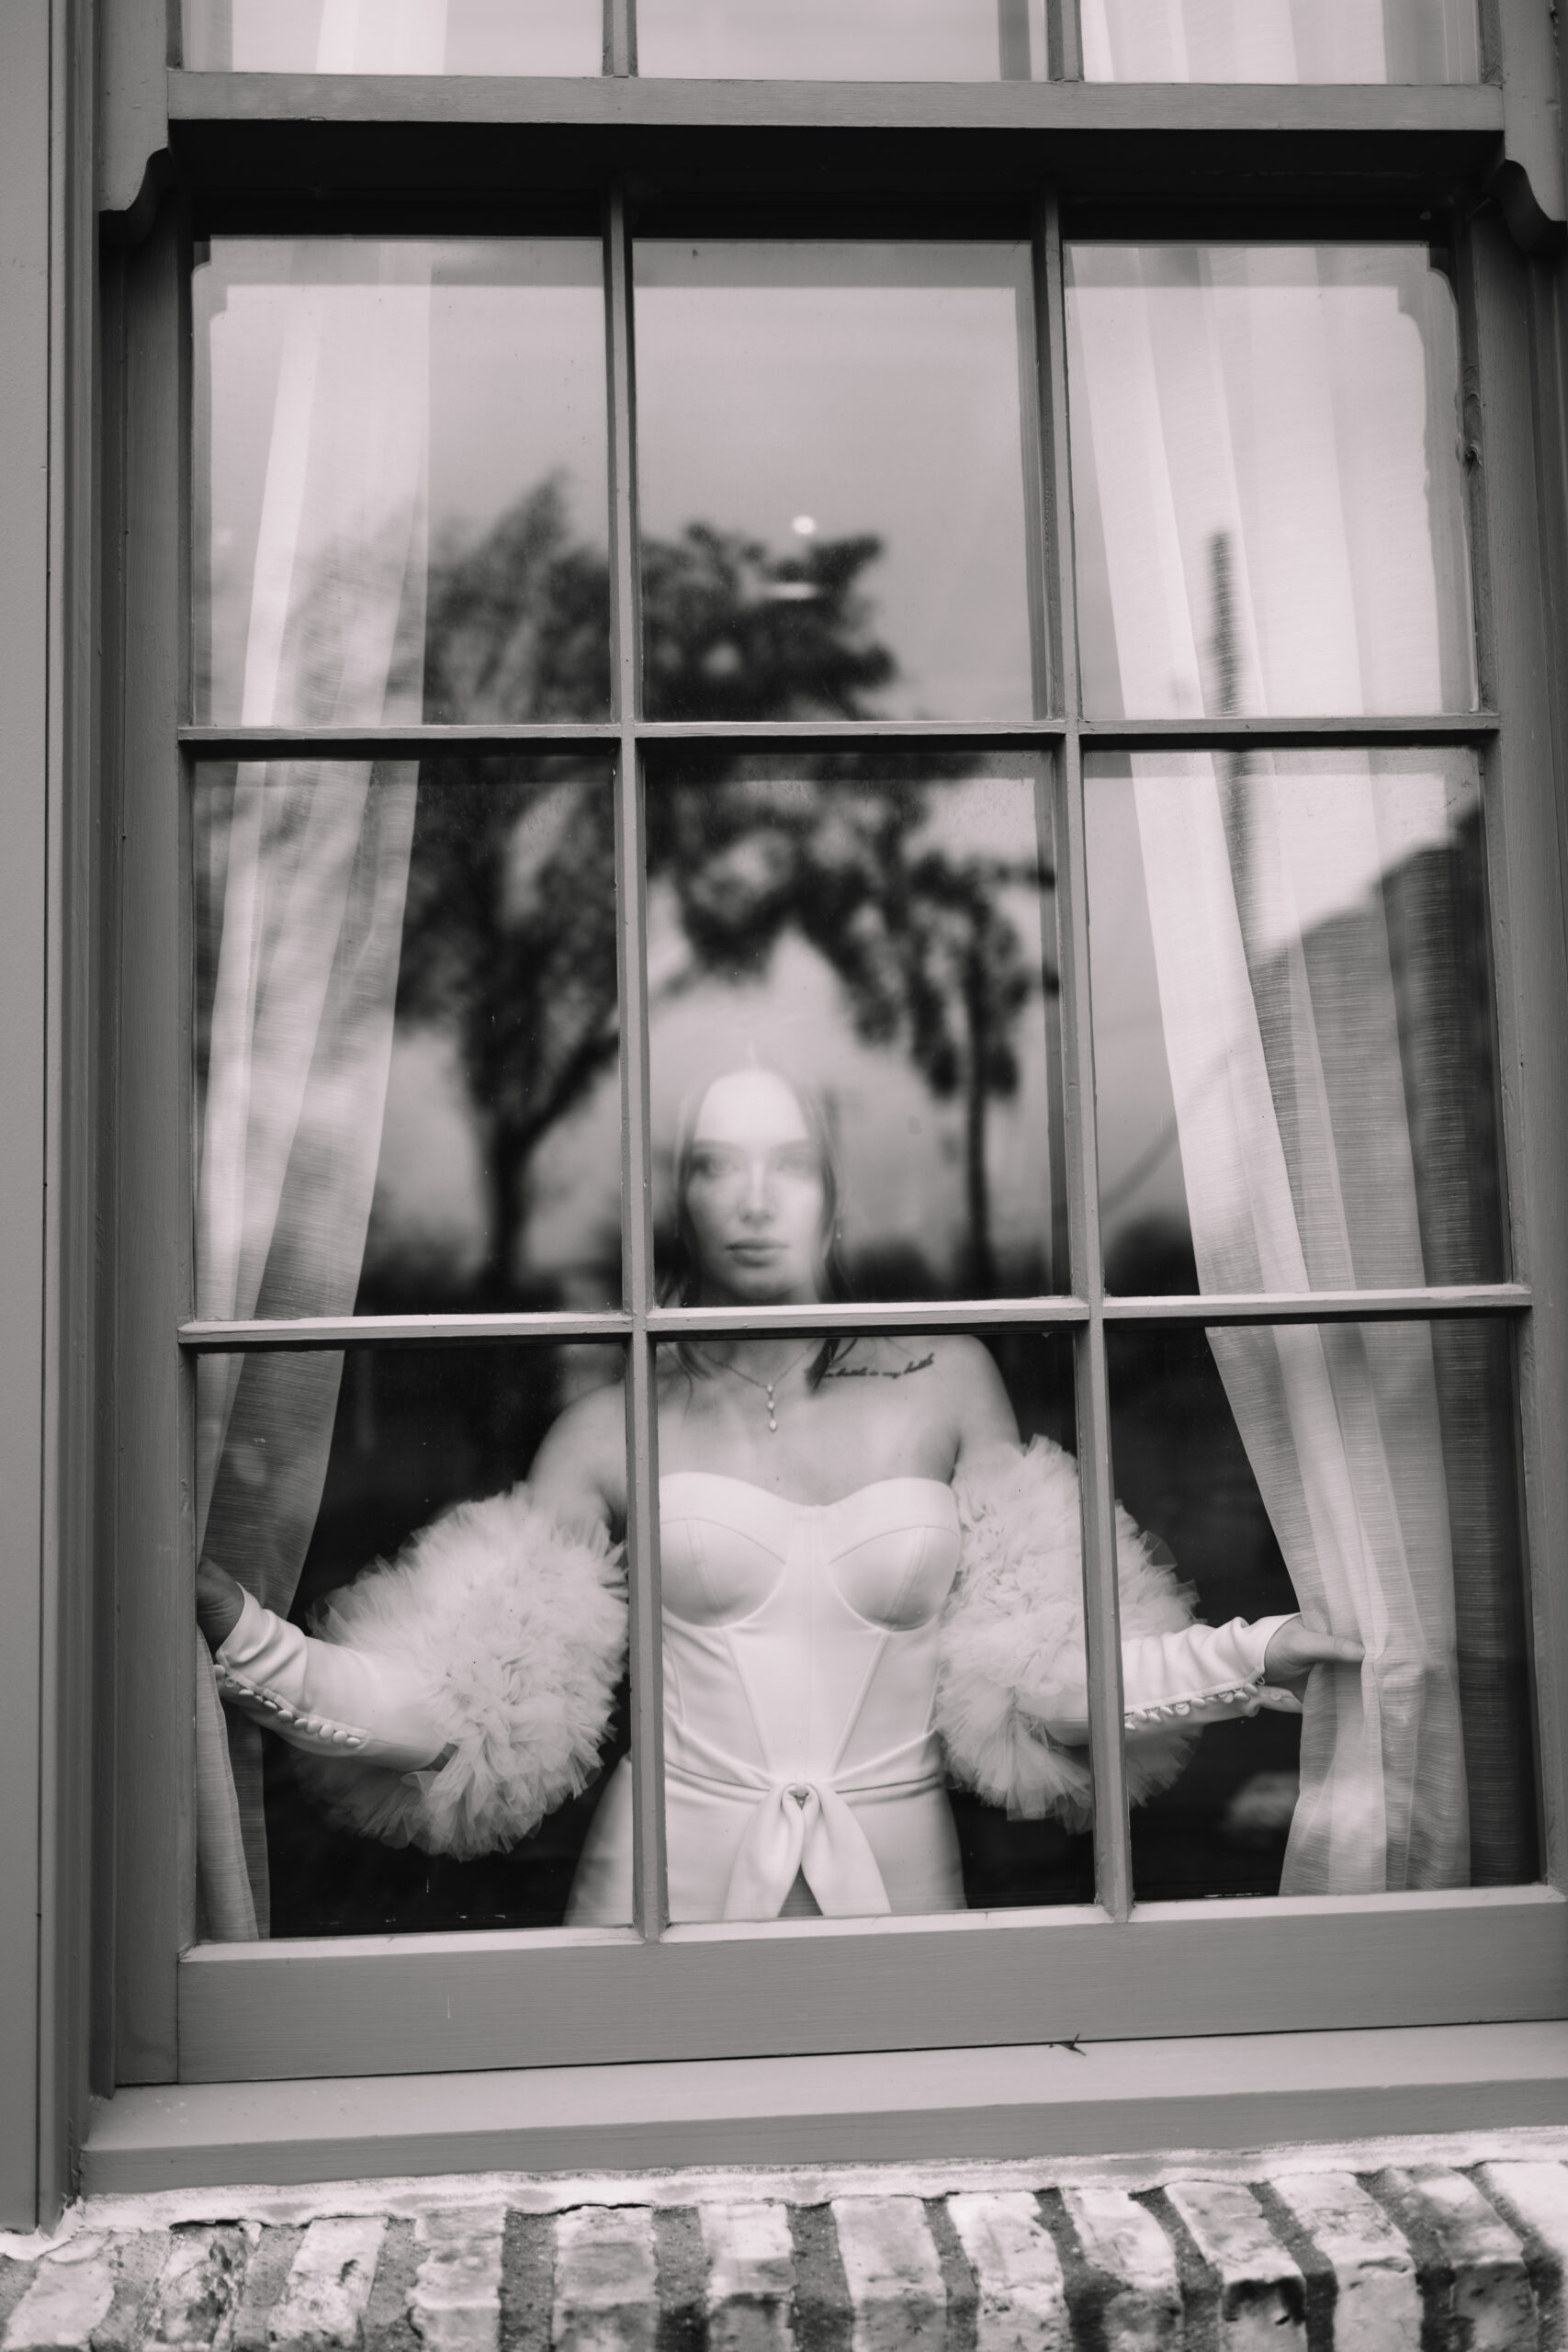 A person in a white outfit stands behind a window, holding the curtains open. The image is in black and white at the machine shop in Minneapolis